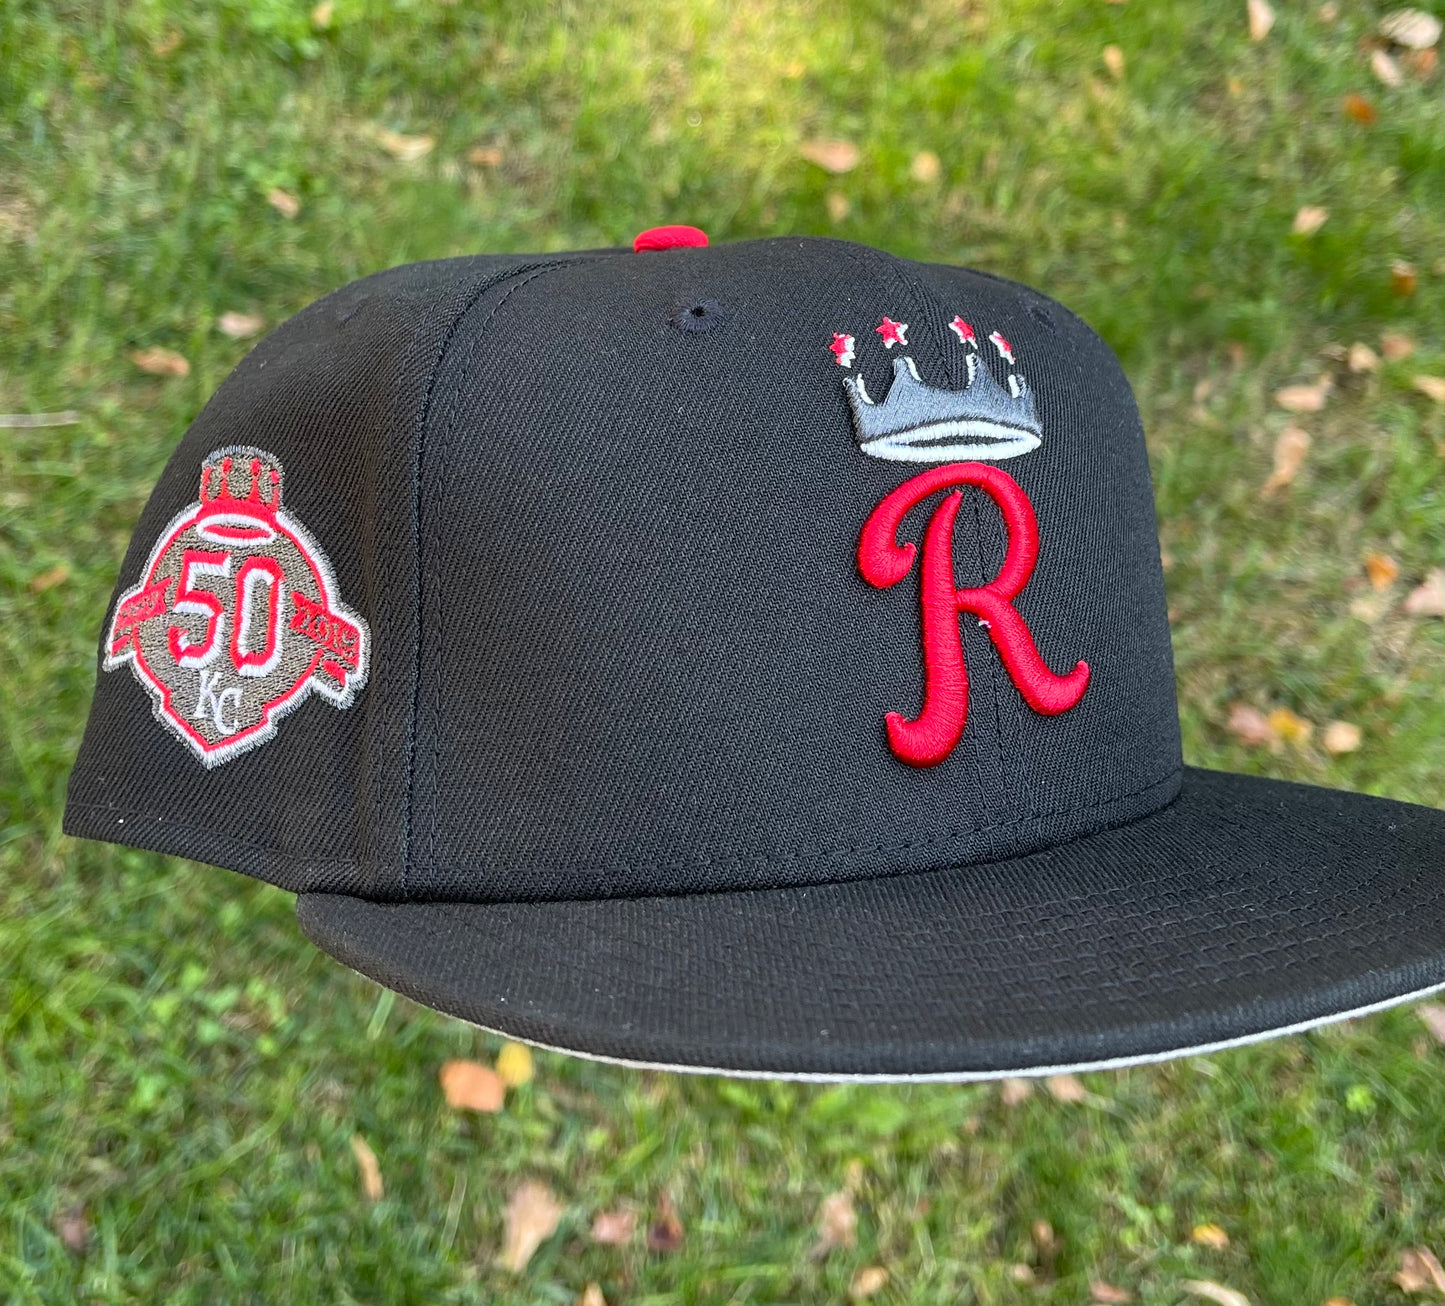 Kansas City Royals 50th Anniversary Side Patch Fitted Hat New Era 5950 (Black/Red/Gray)